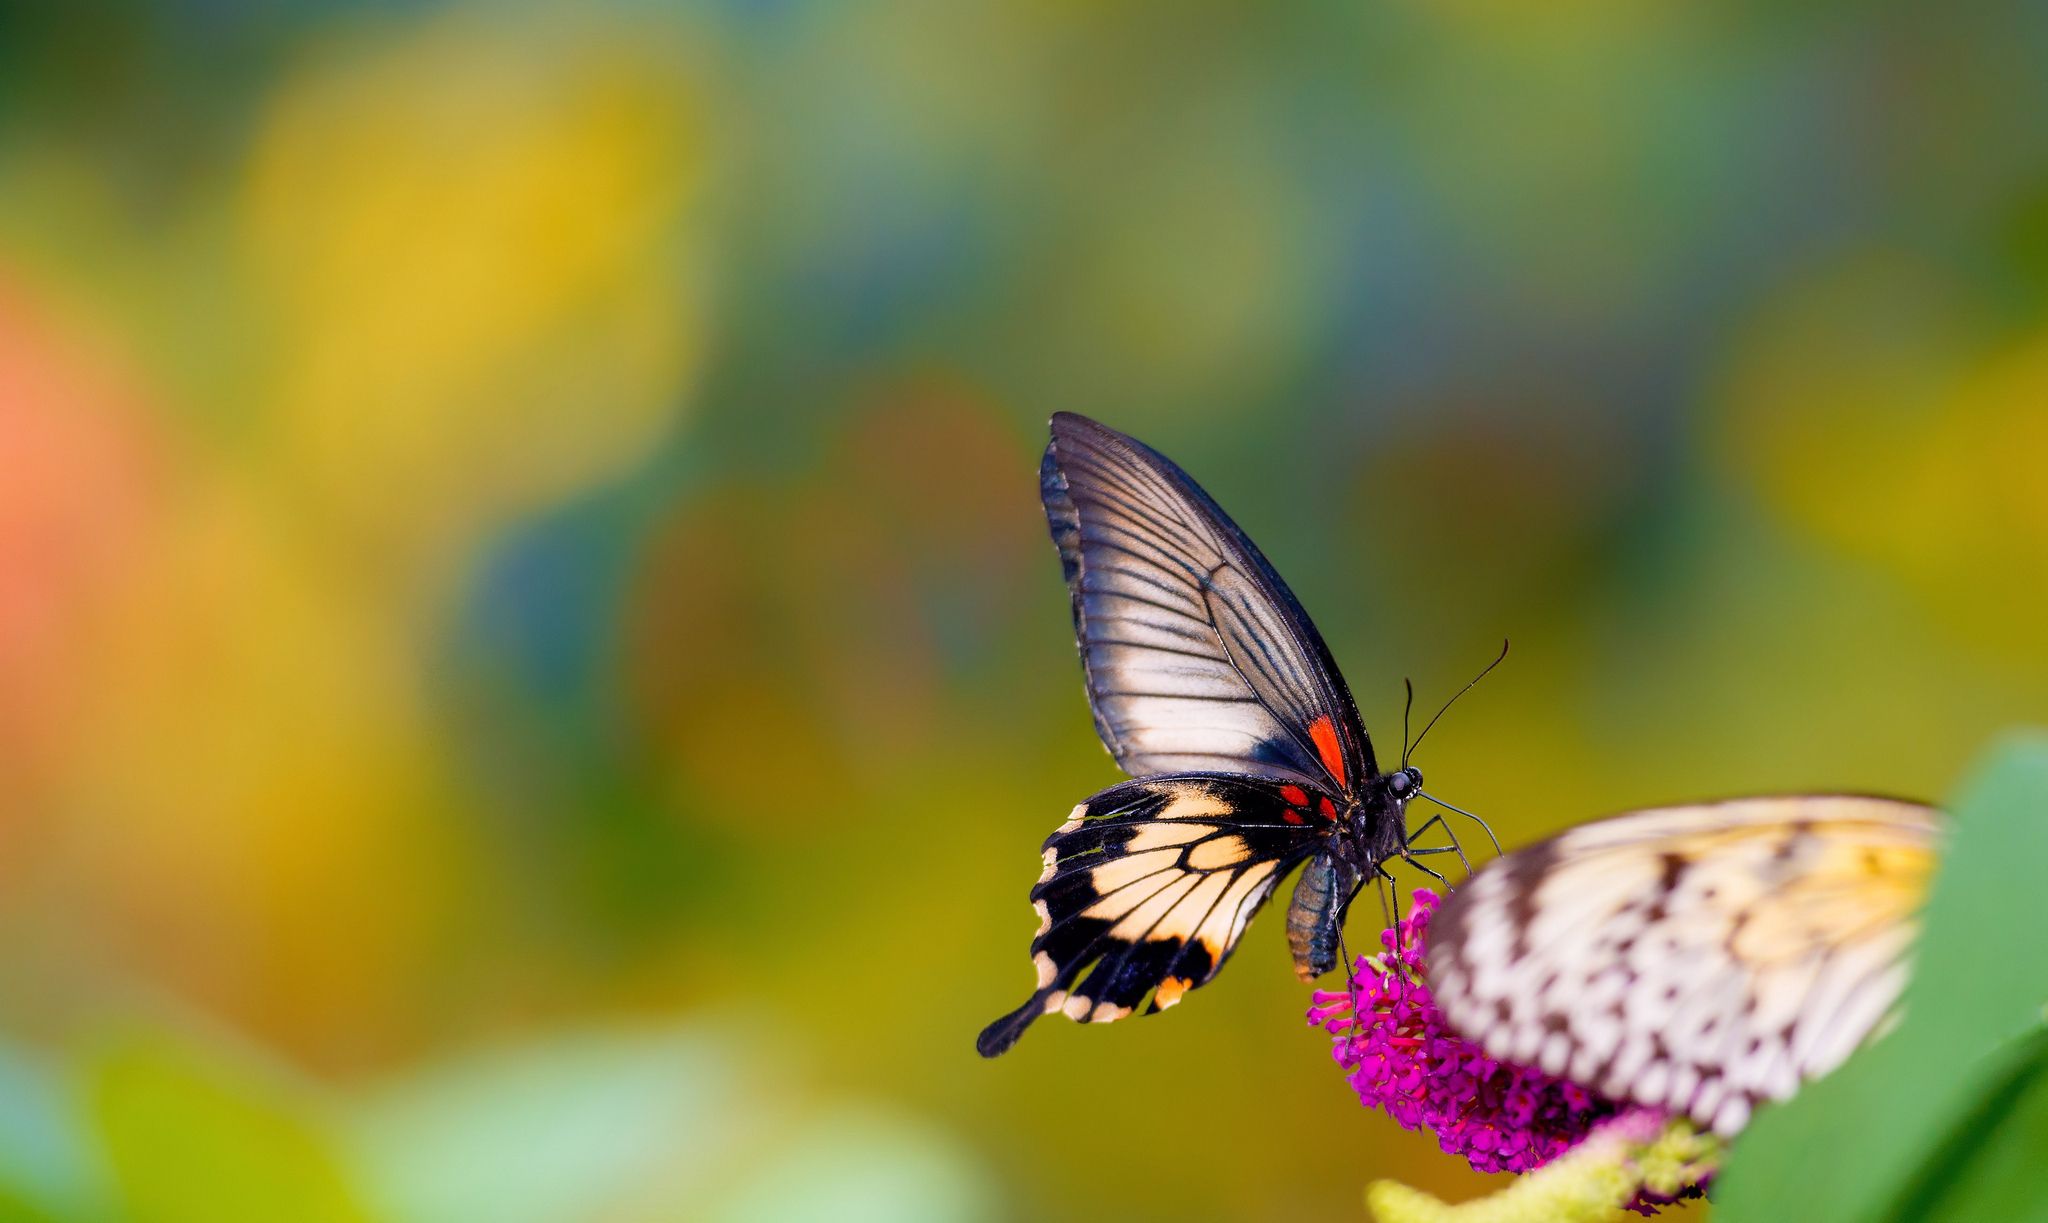 Attachment File Of Butterfly Macro Photo Wallpaper With Colorful